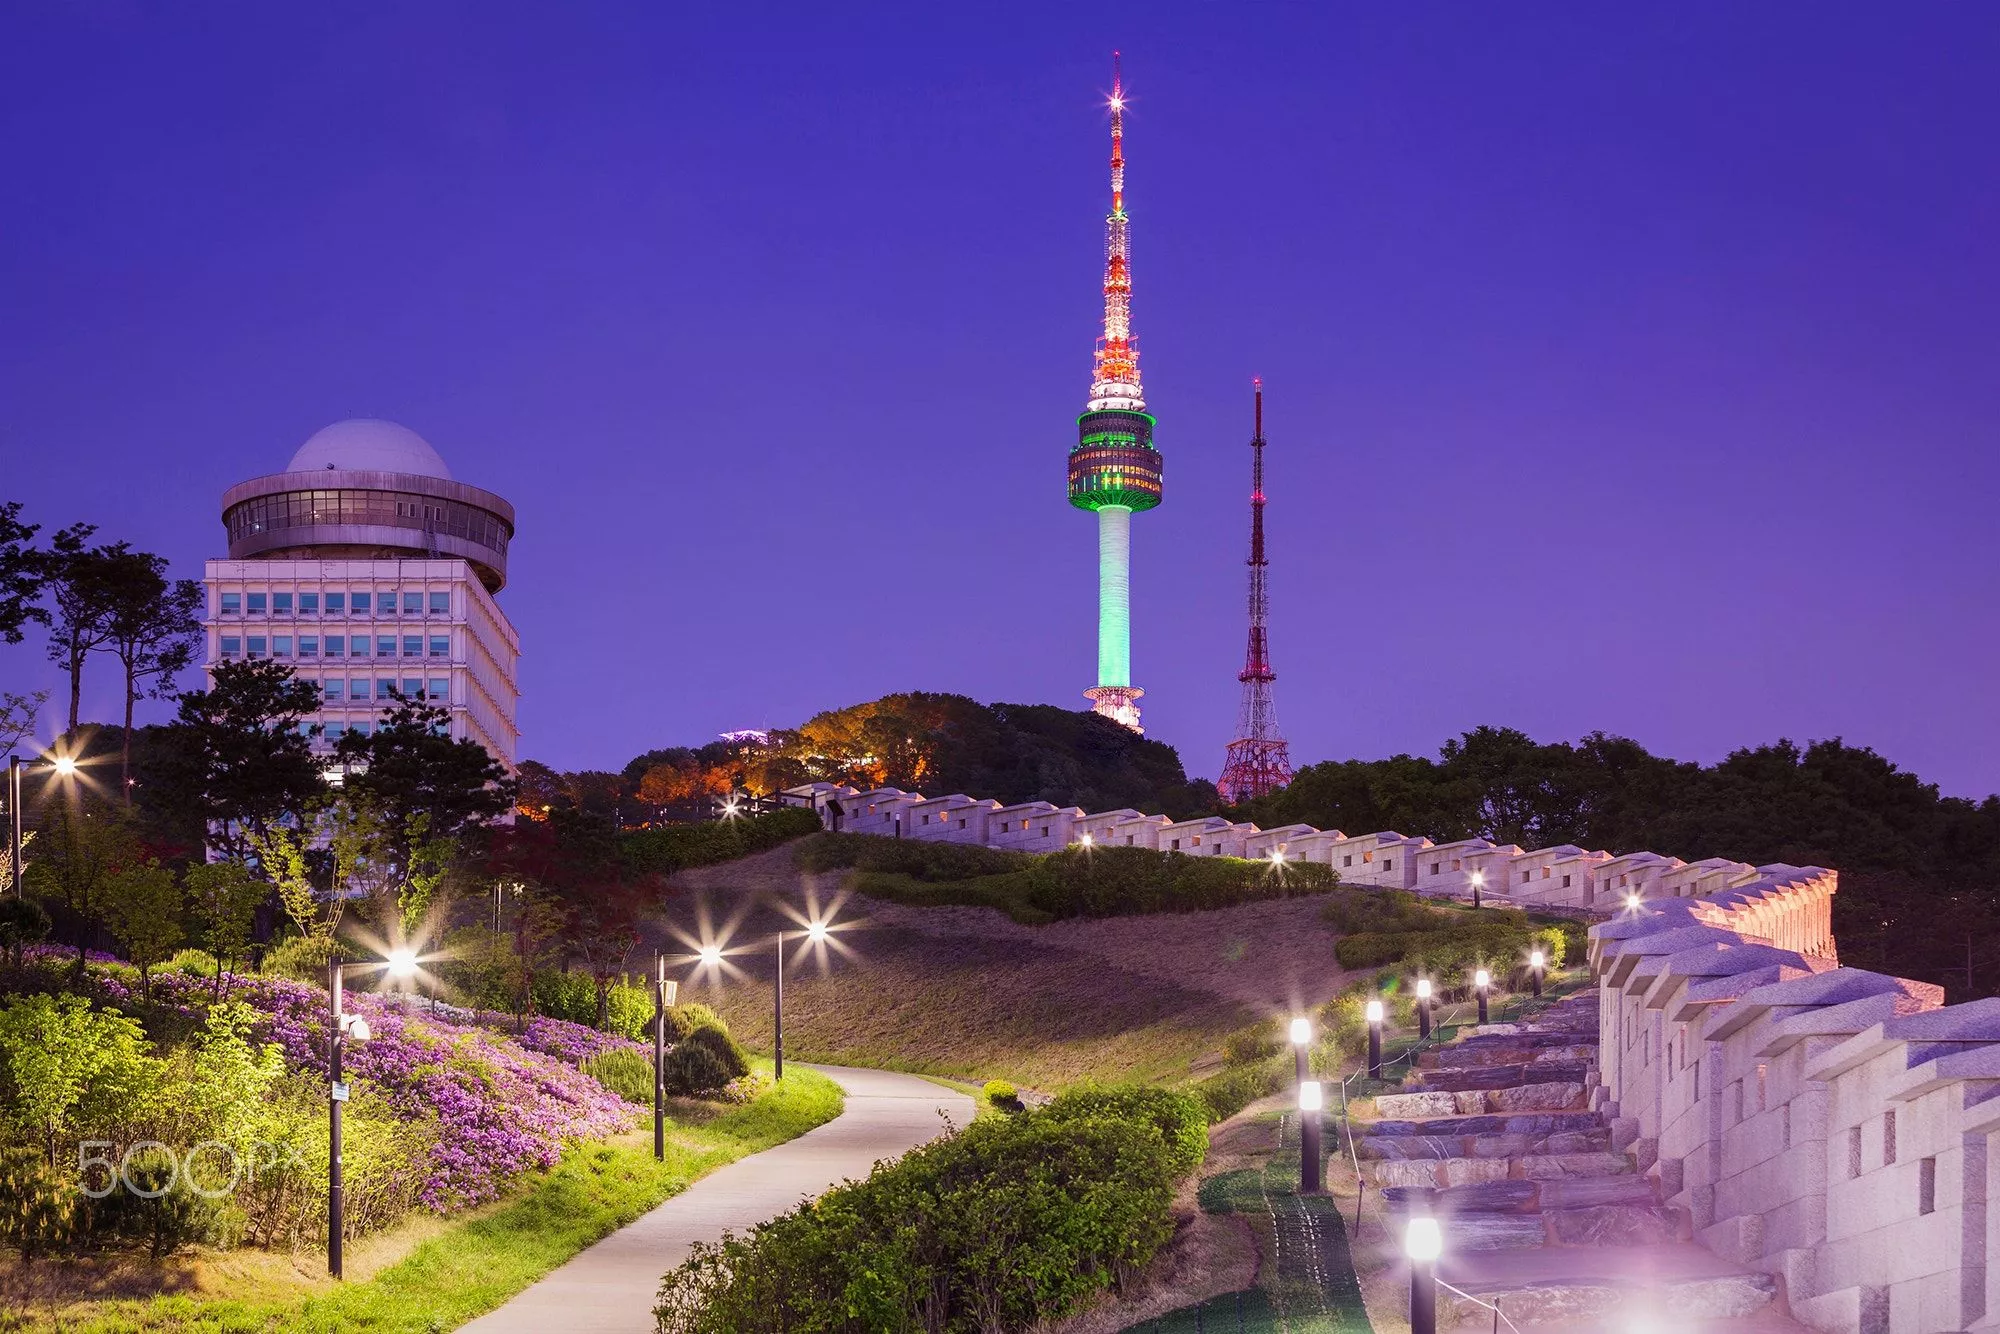 Namsan Park in South Korea, East Asia | Trekking & Hiking - Rated 3.7